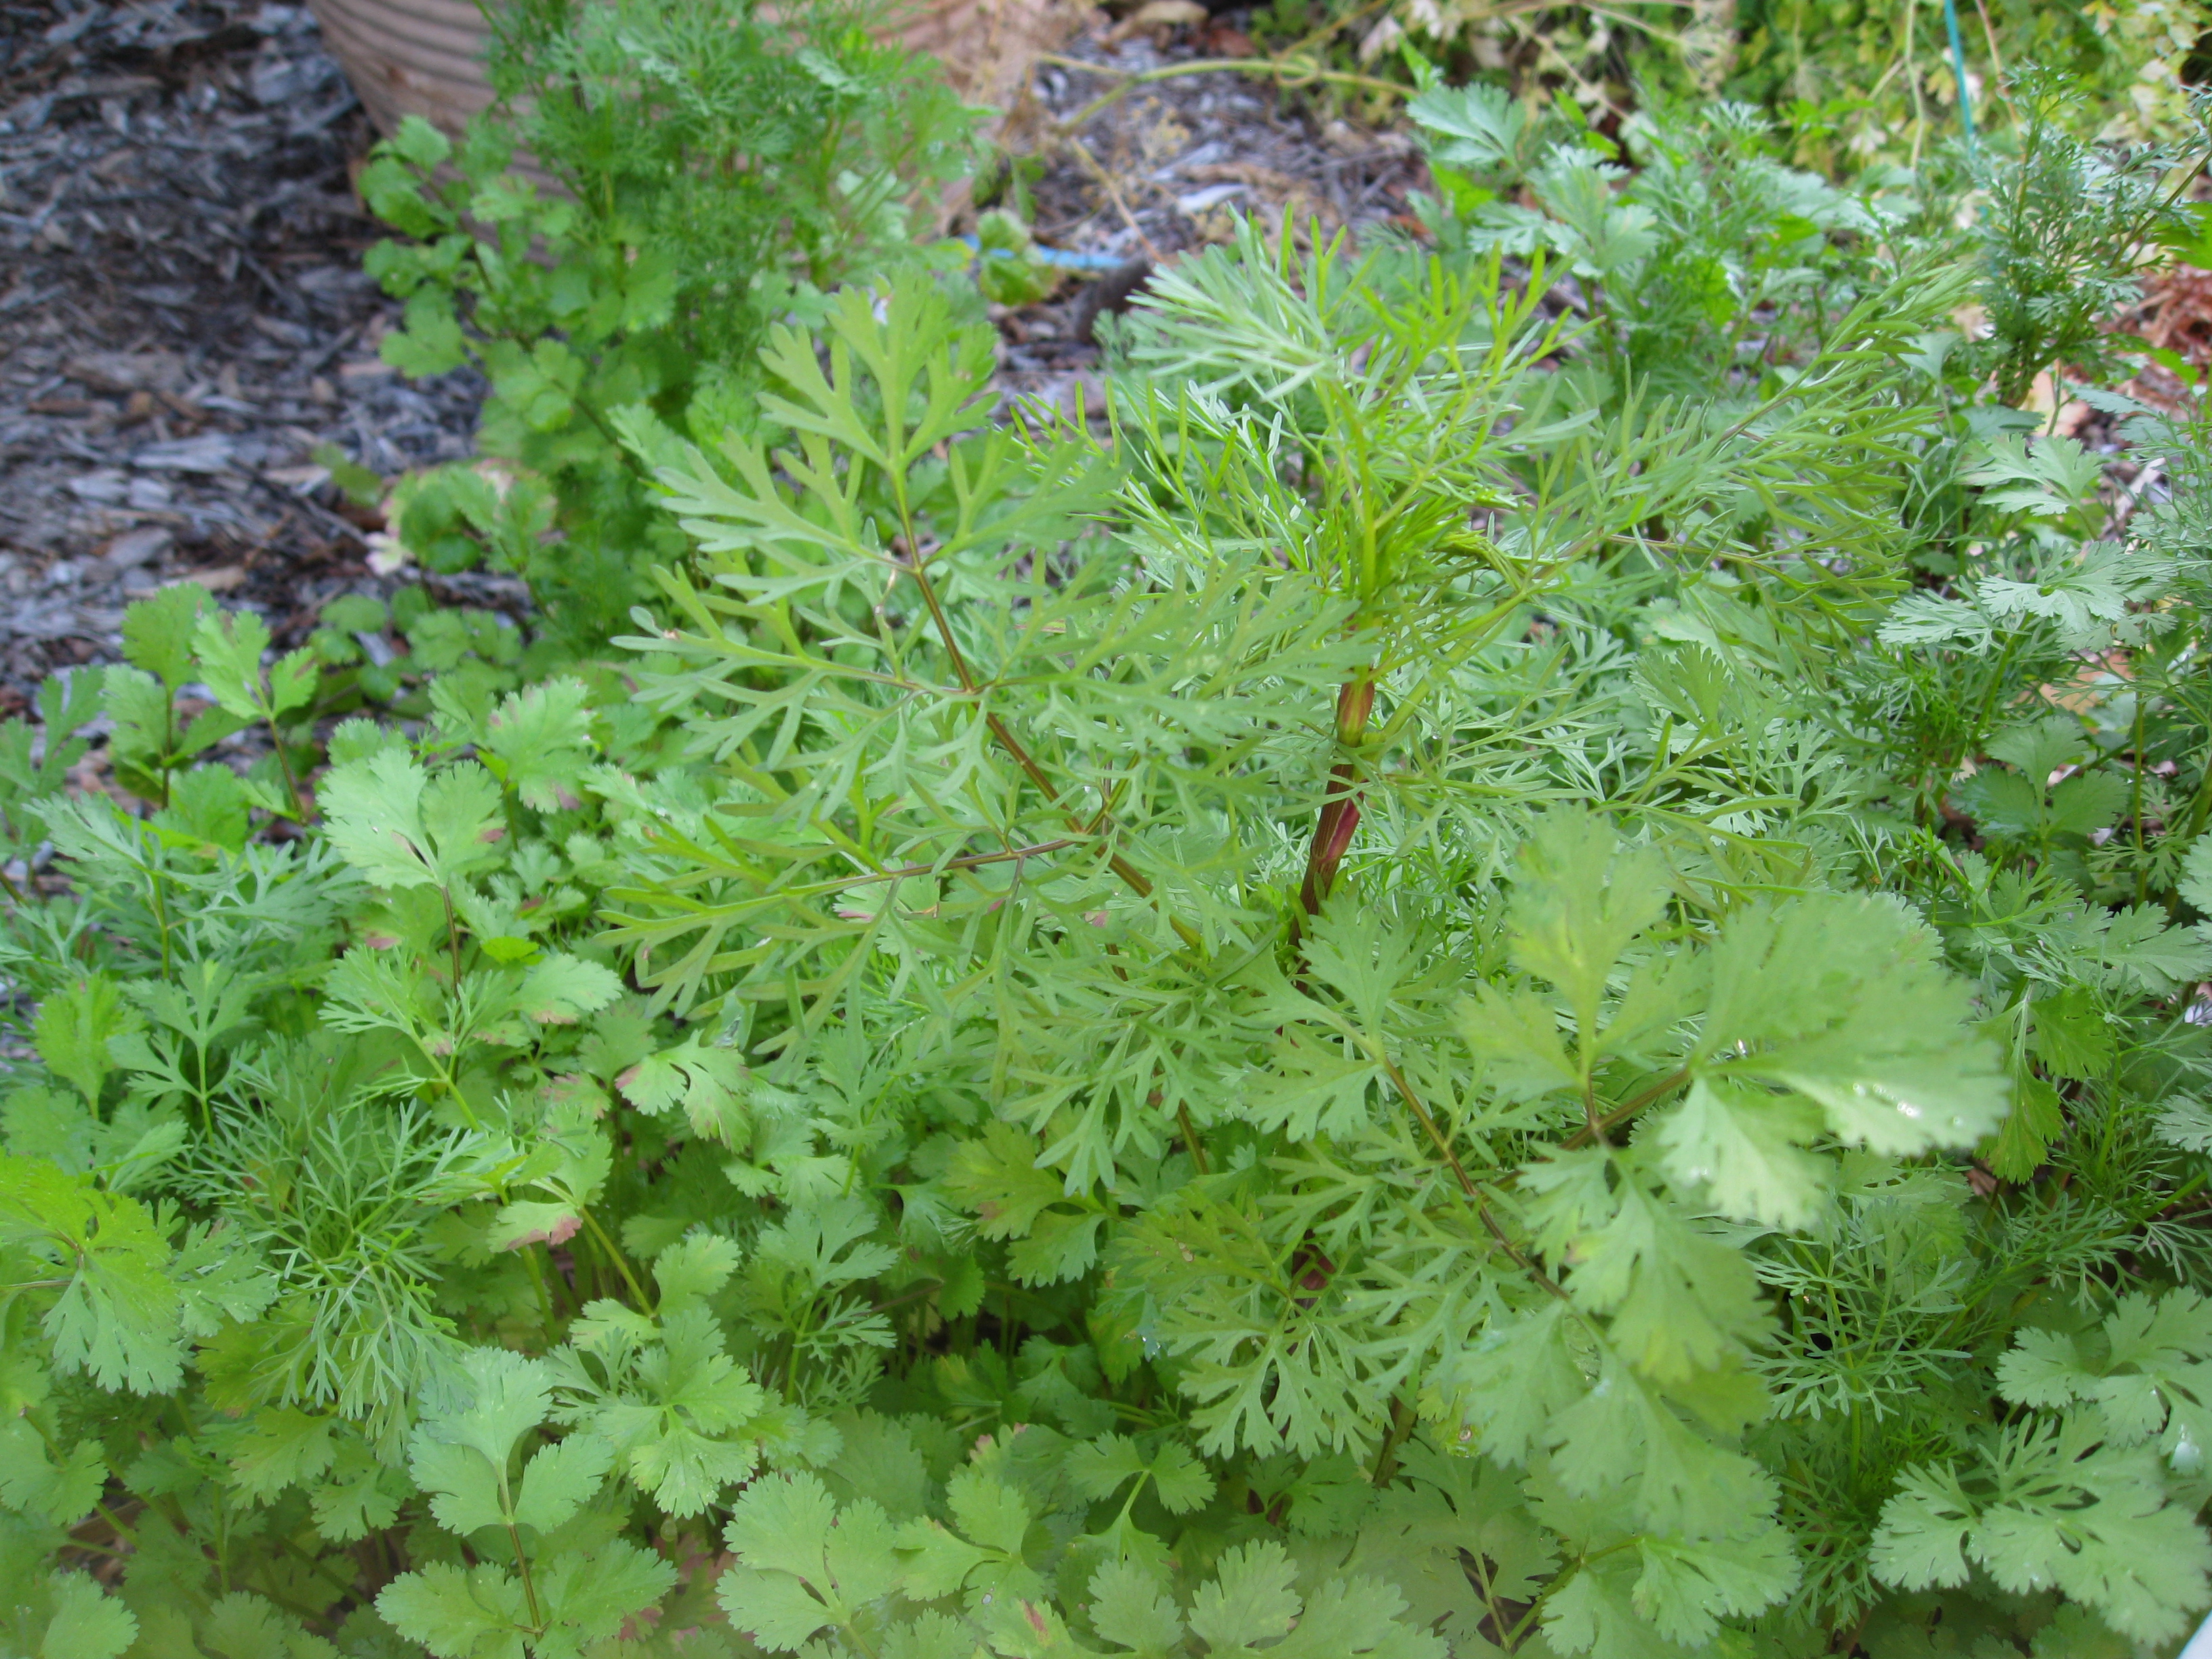 Volunteer cilantro bolts to seed. We'll harvest and puree with a little oil and freeze it for later. 